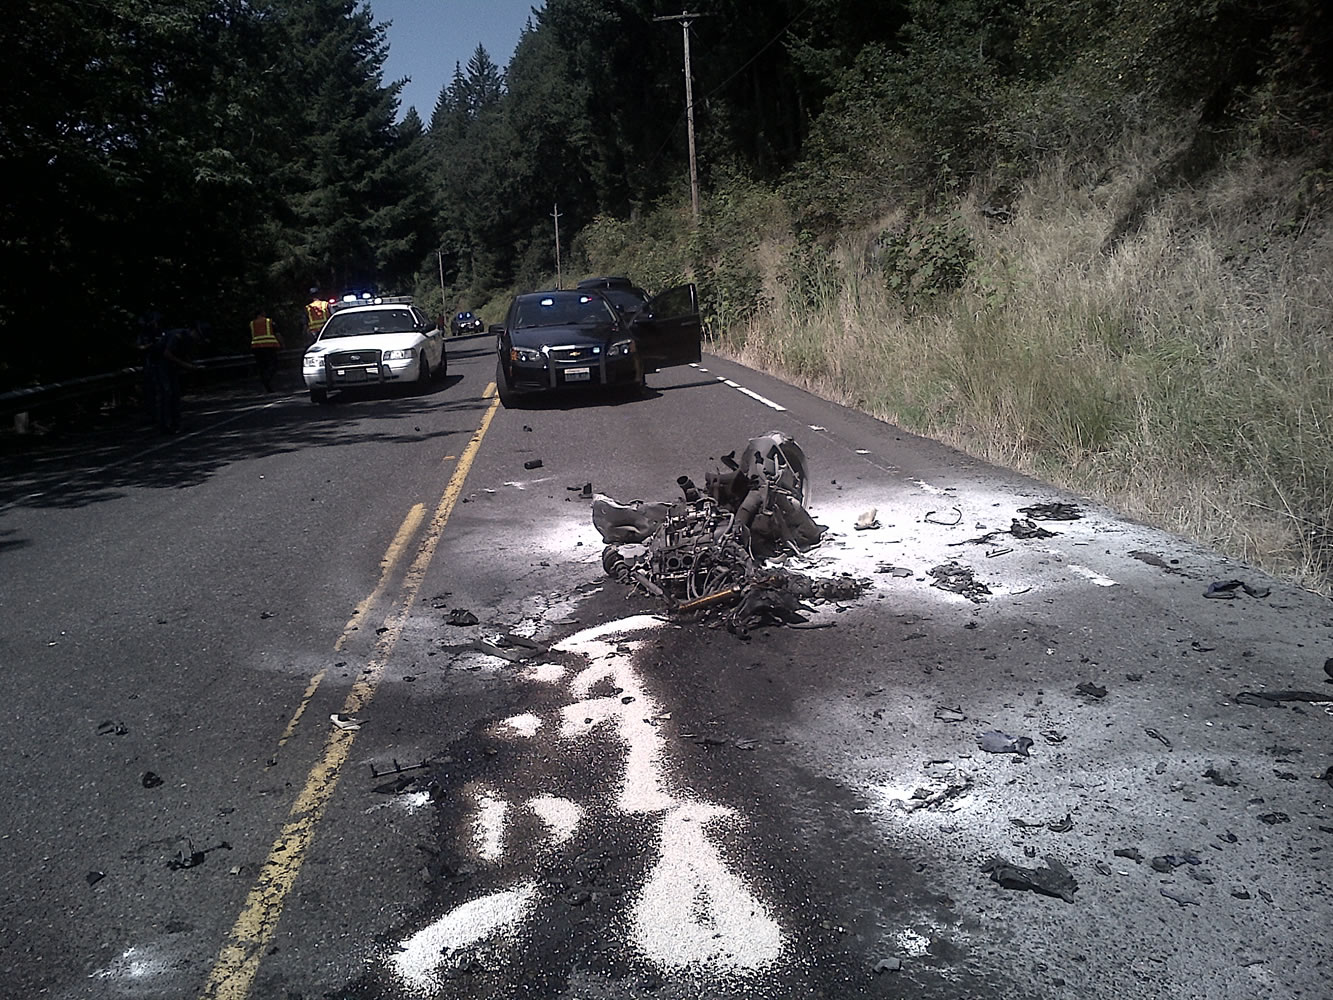 A motorcyclist died in a head-on crash with a tractor trailer on state Highway 14 east of Washougal near Lawton Creek Tuesday morning.